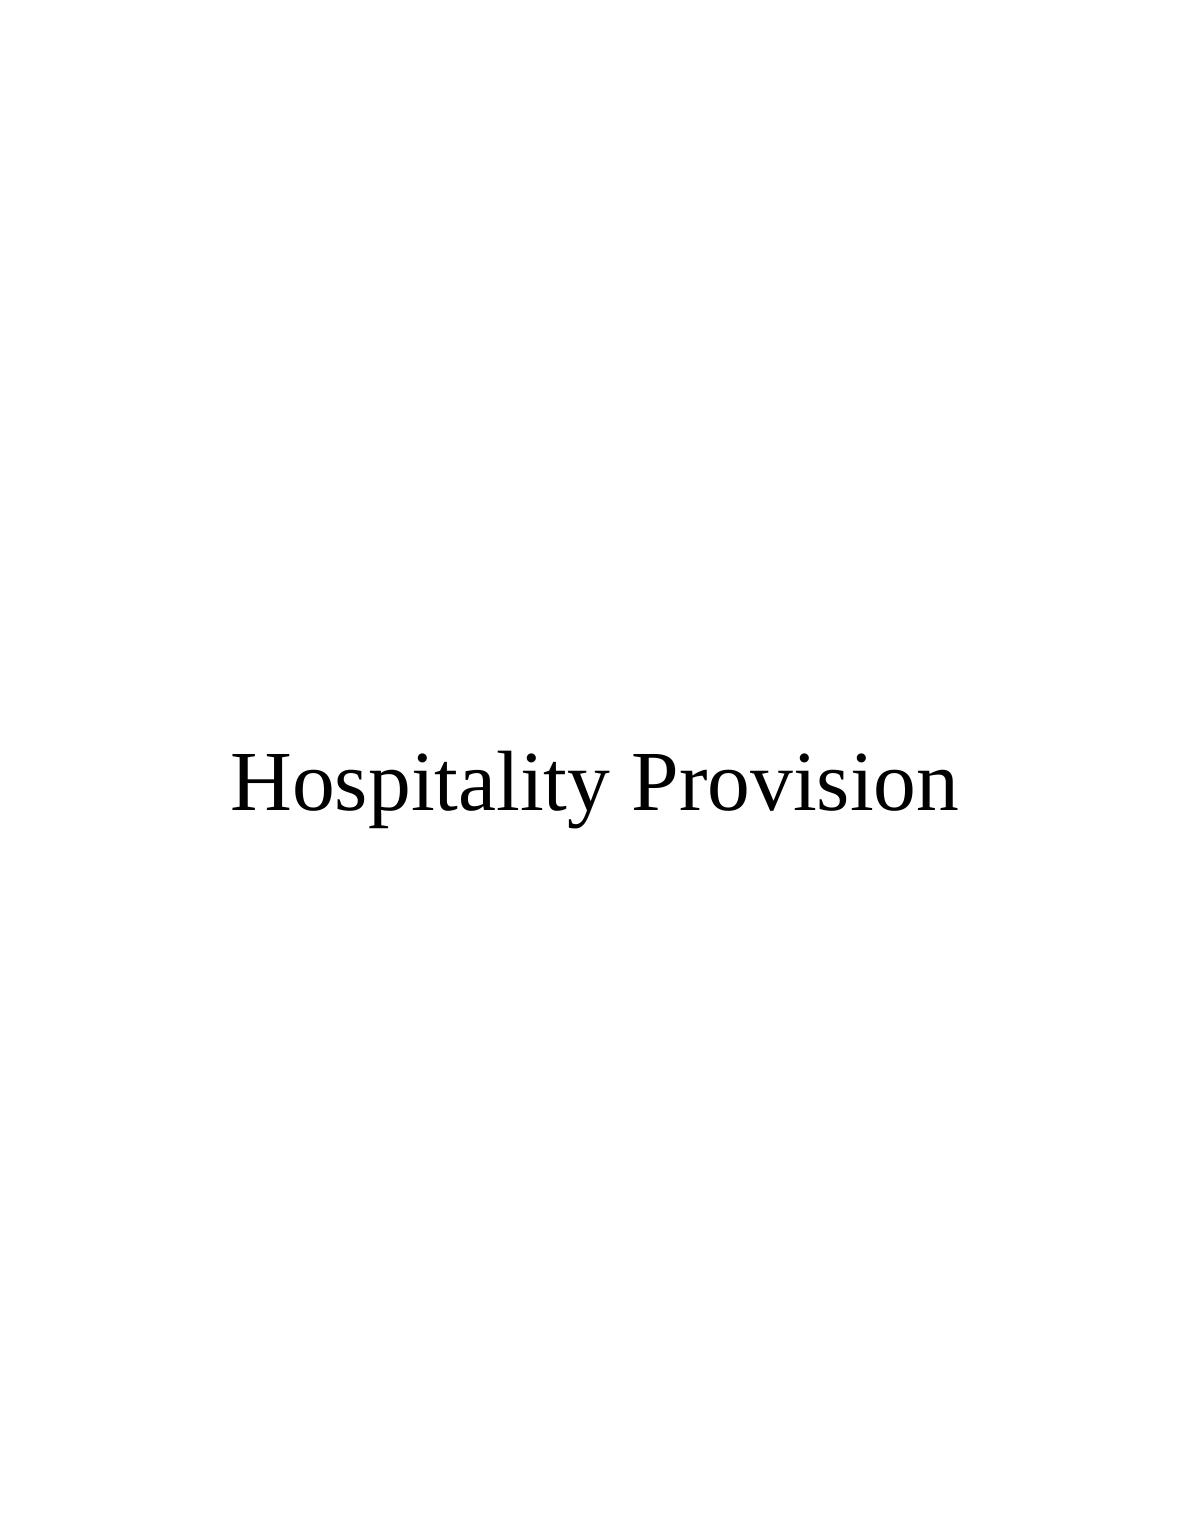 A New Hospitality Provision Business Outlining Product-Service Concept_1